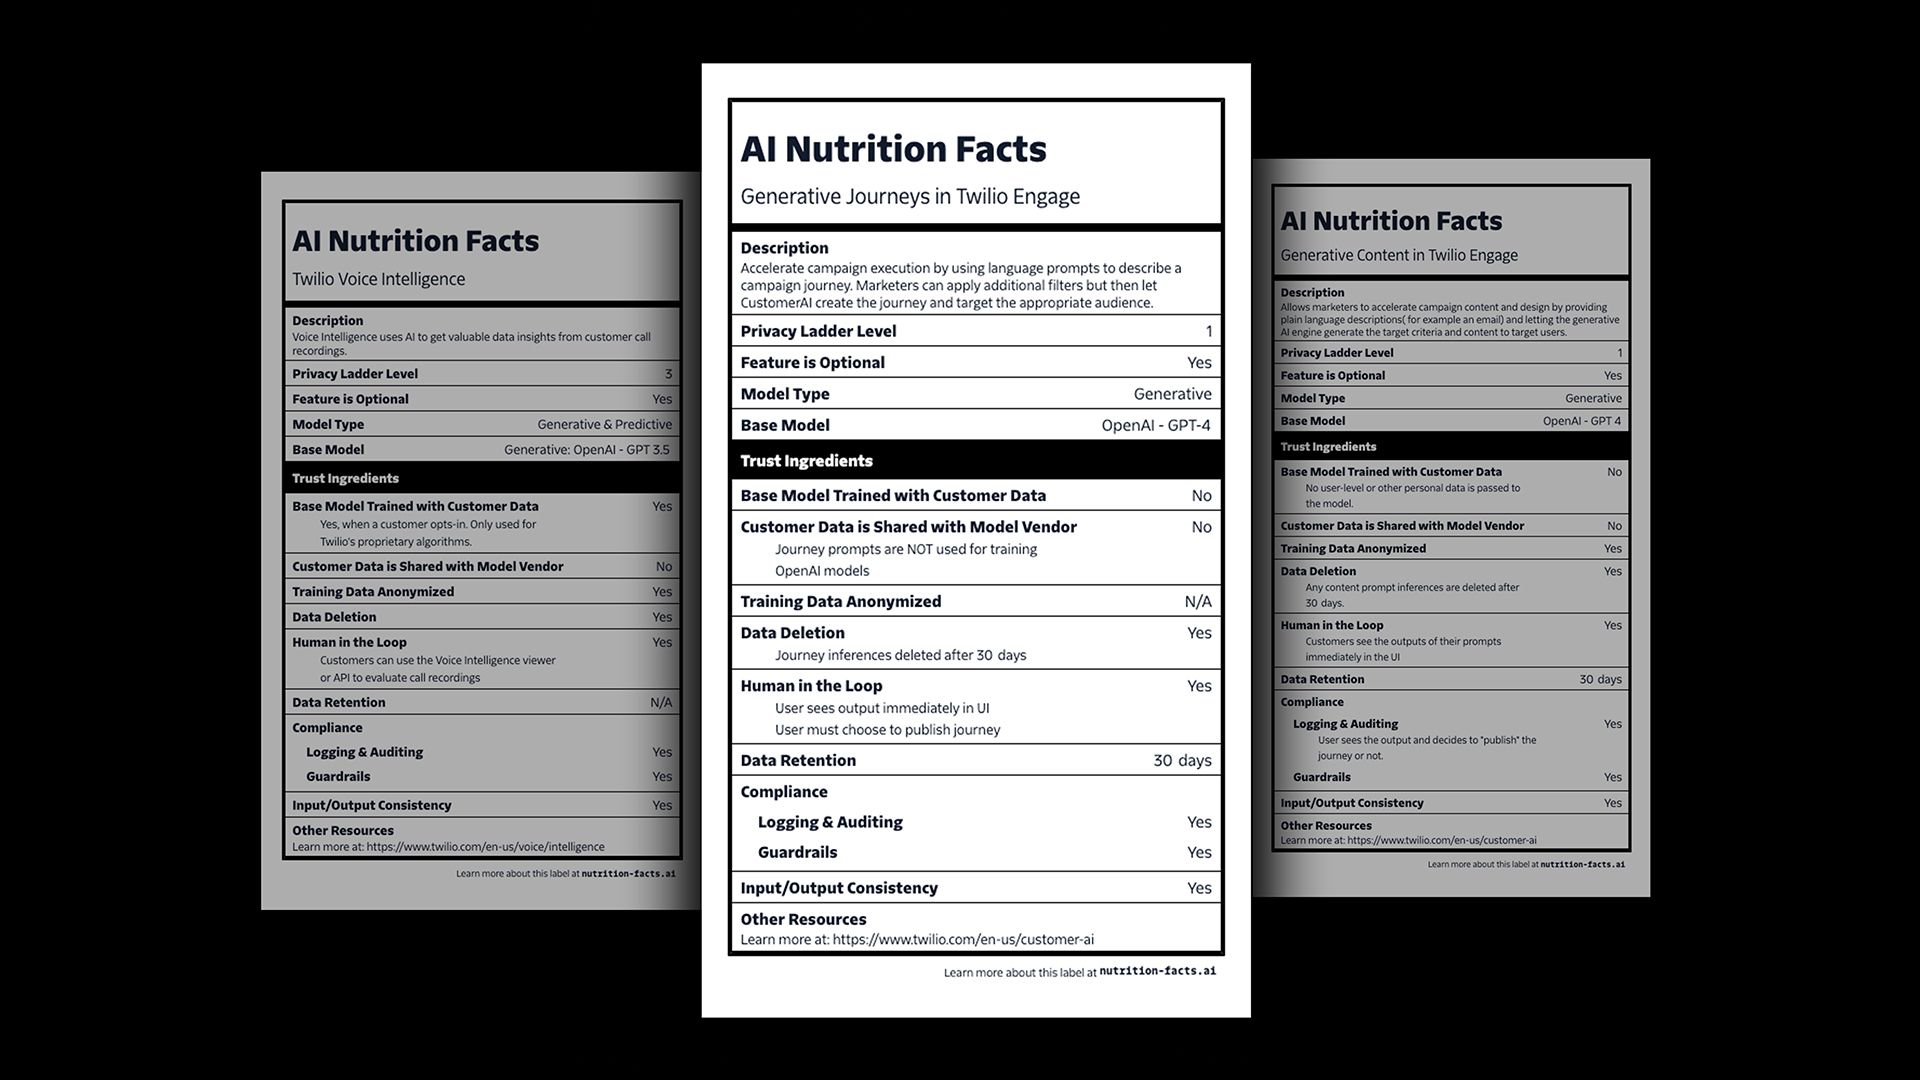 Twilio has created "nutrition labels" to show how data will be used for AI training